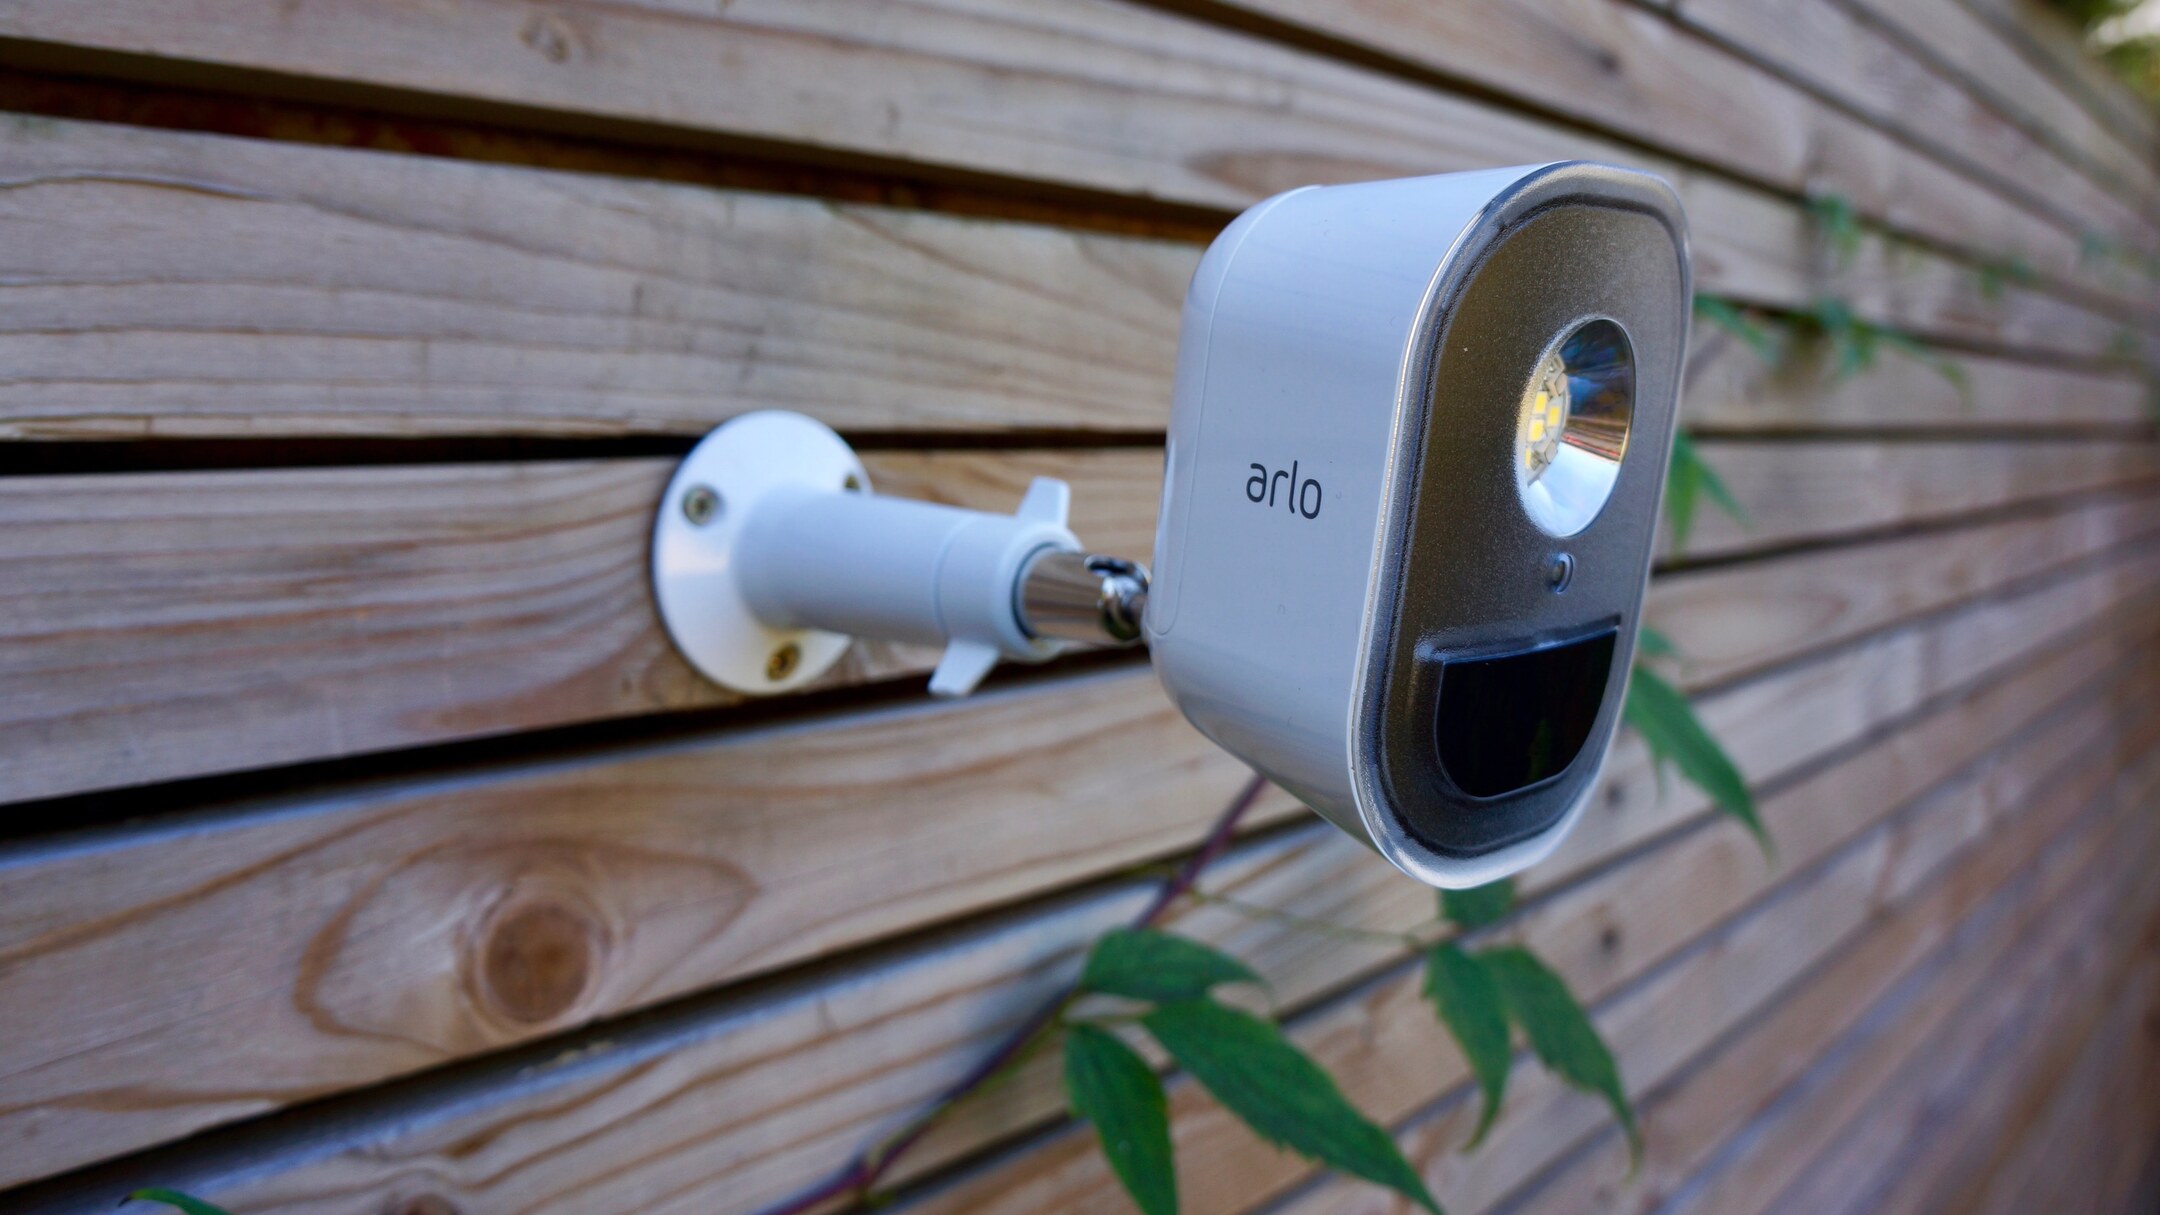 How To Configure Motion Detector Lights To Trigger Arlo Recording